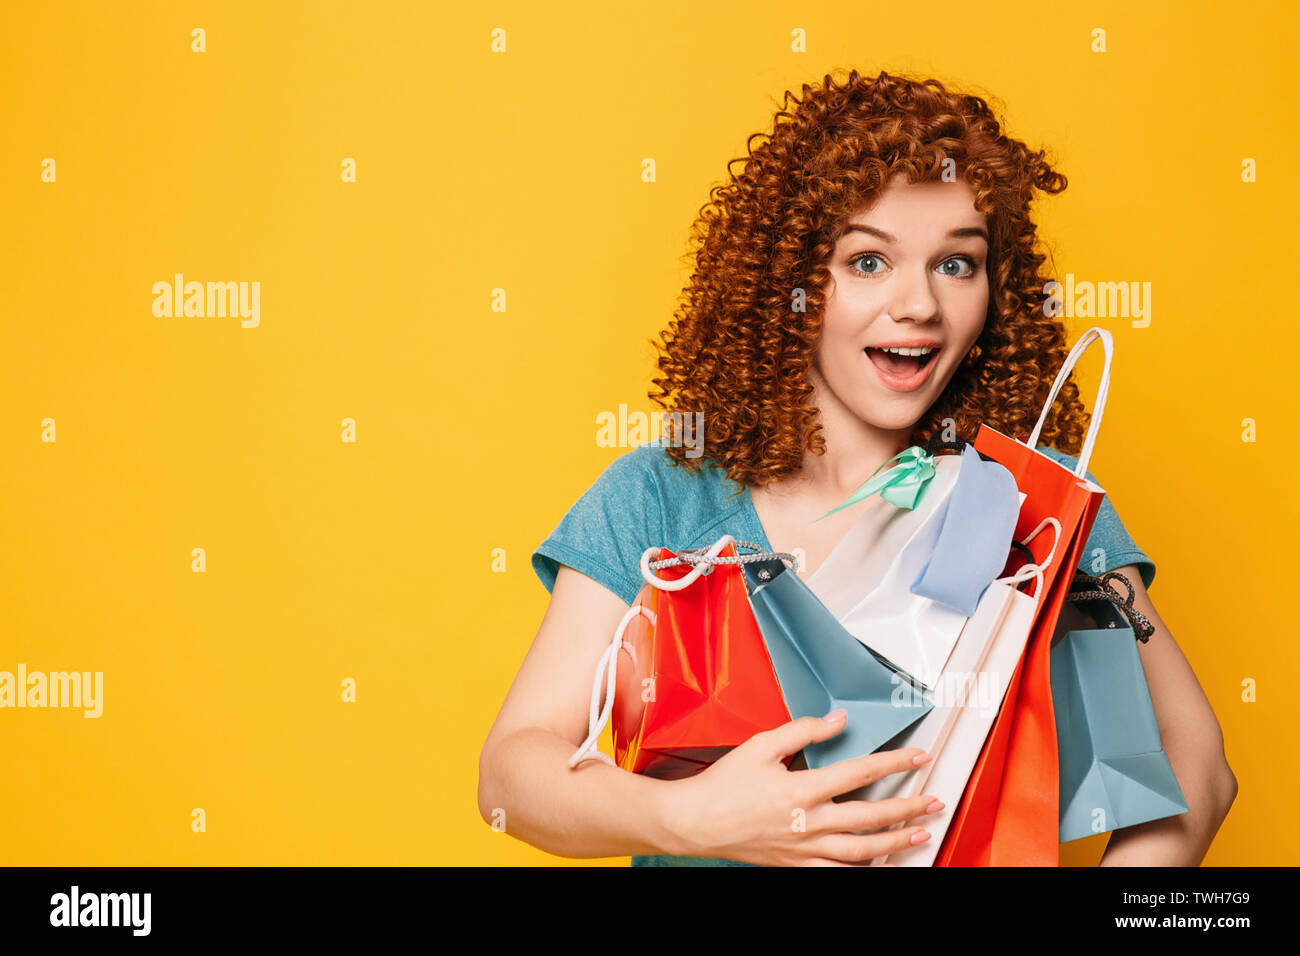 Curly haired woman with surprised face holding many shopping bags on yellow background Stock Photo